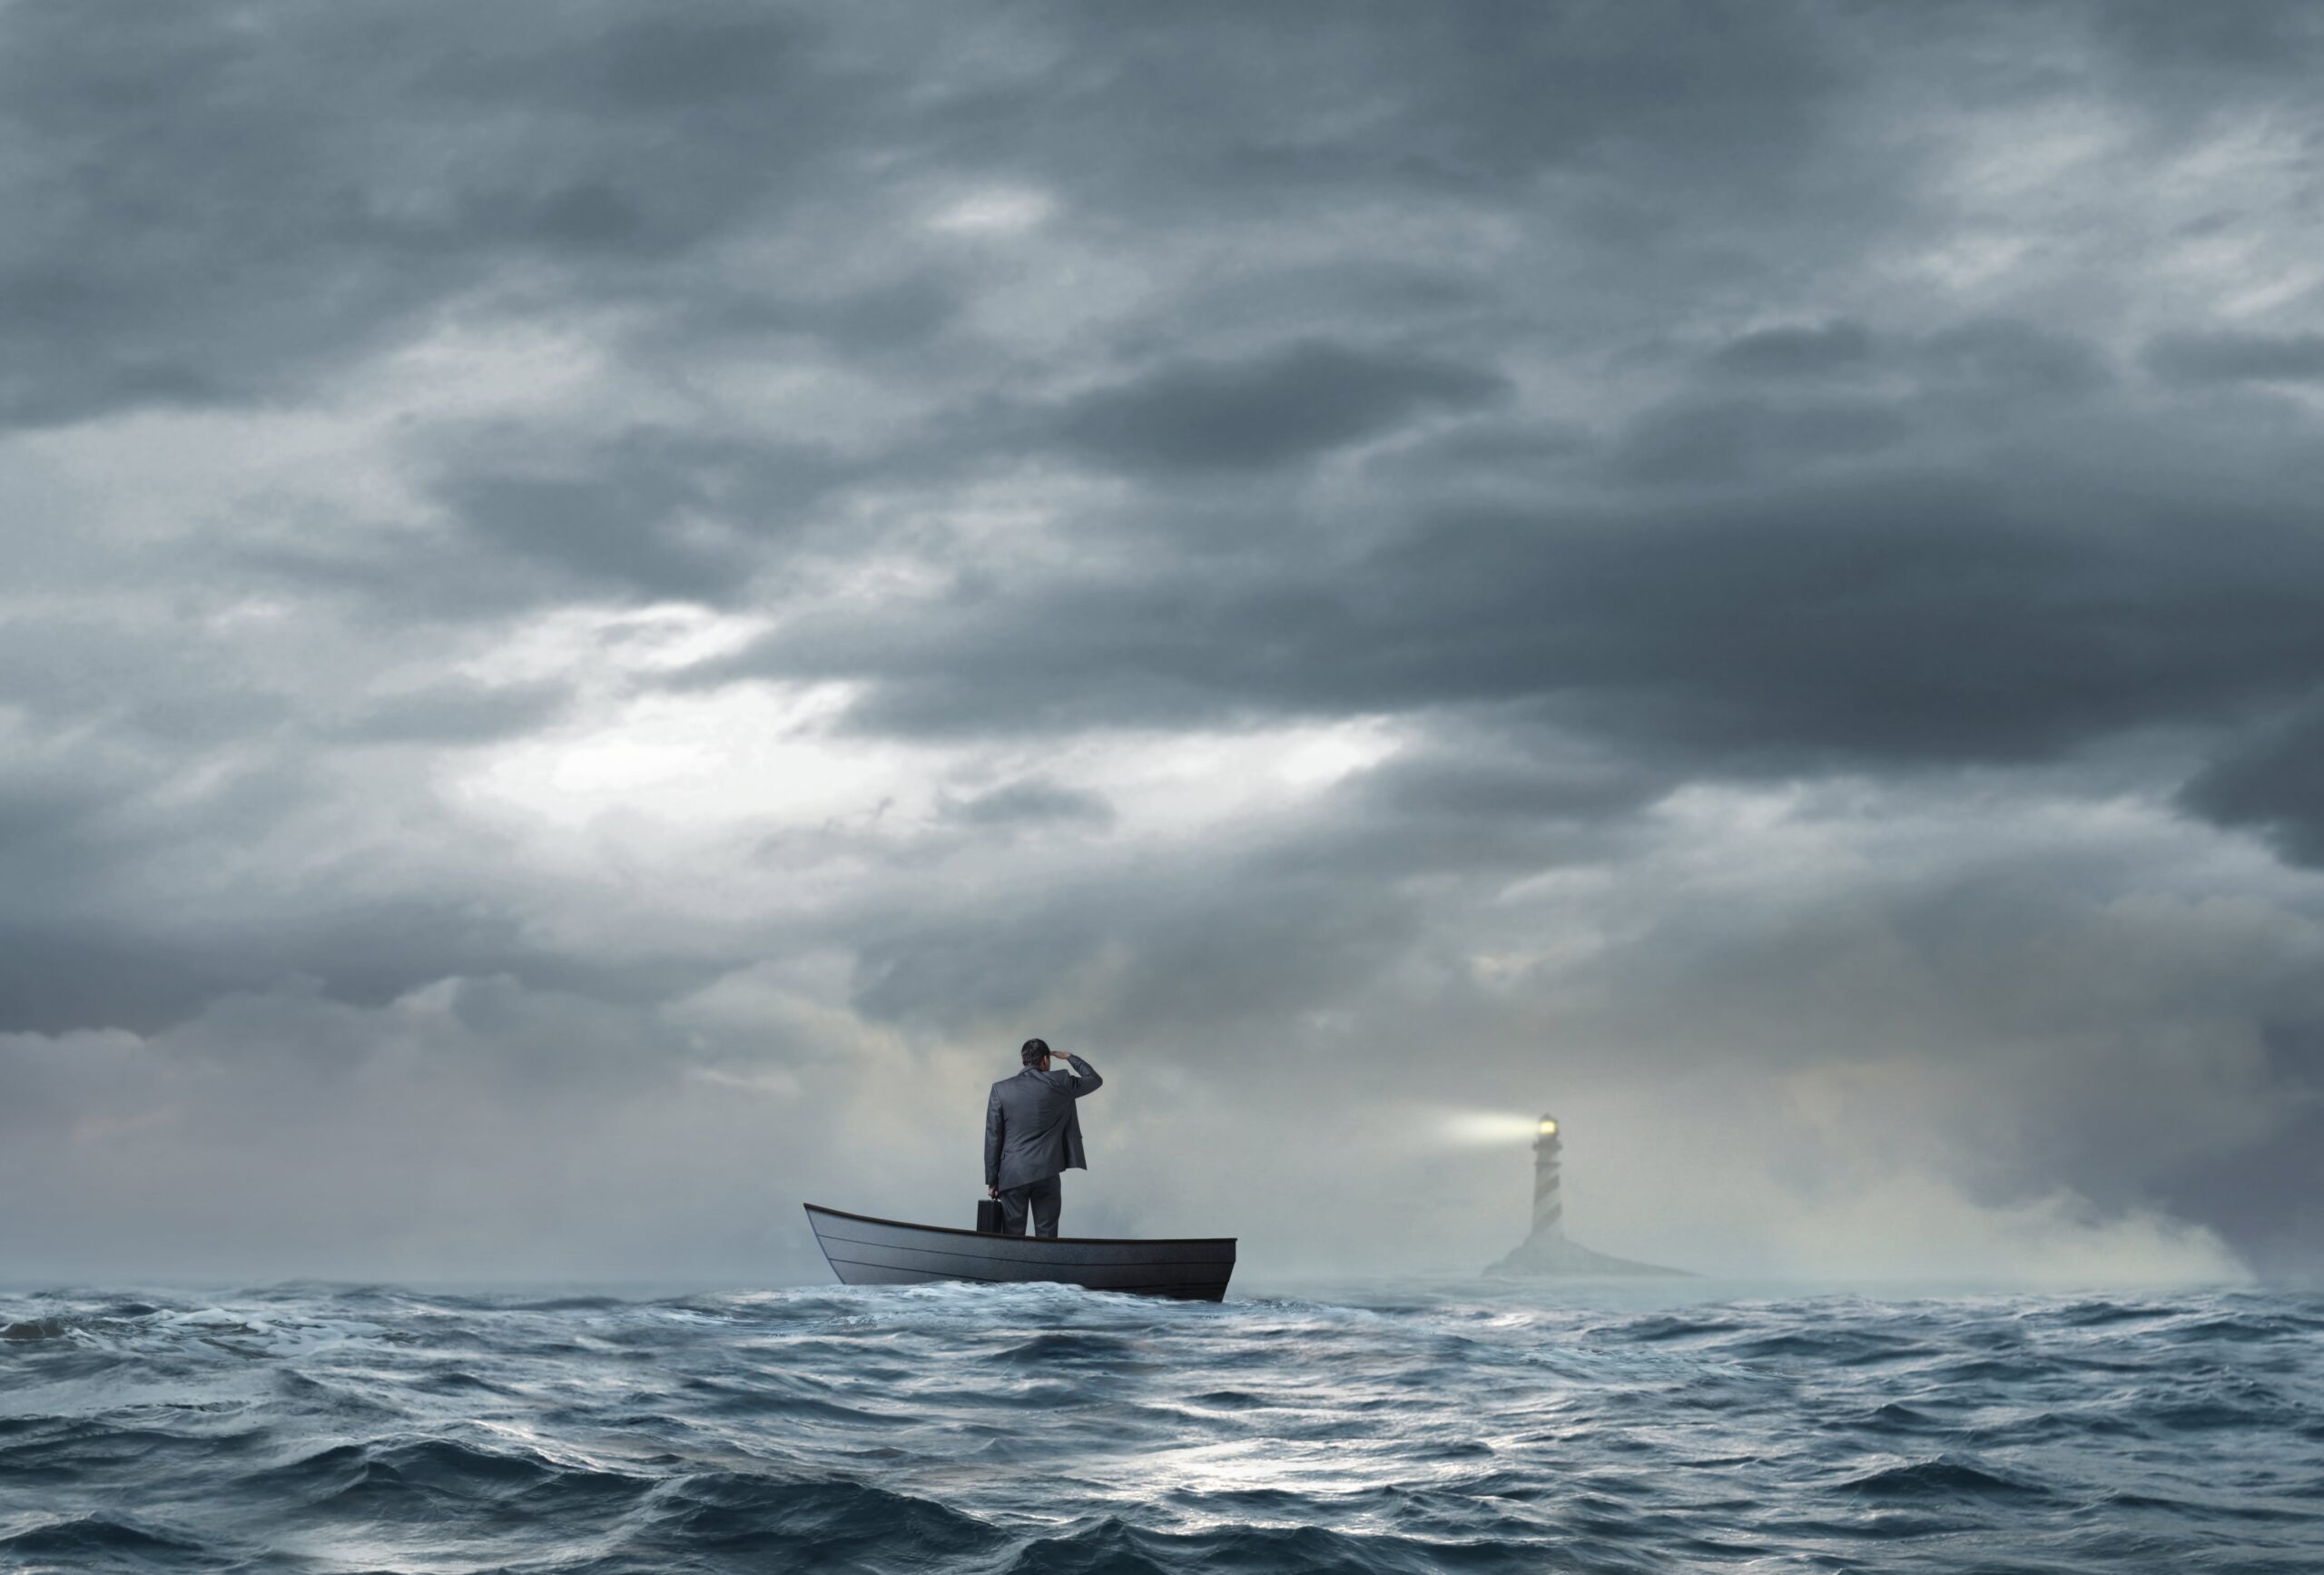 Man alone in a small boat on the open sea staring toward a lighthouse.